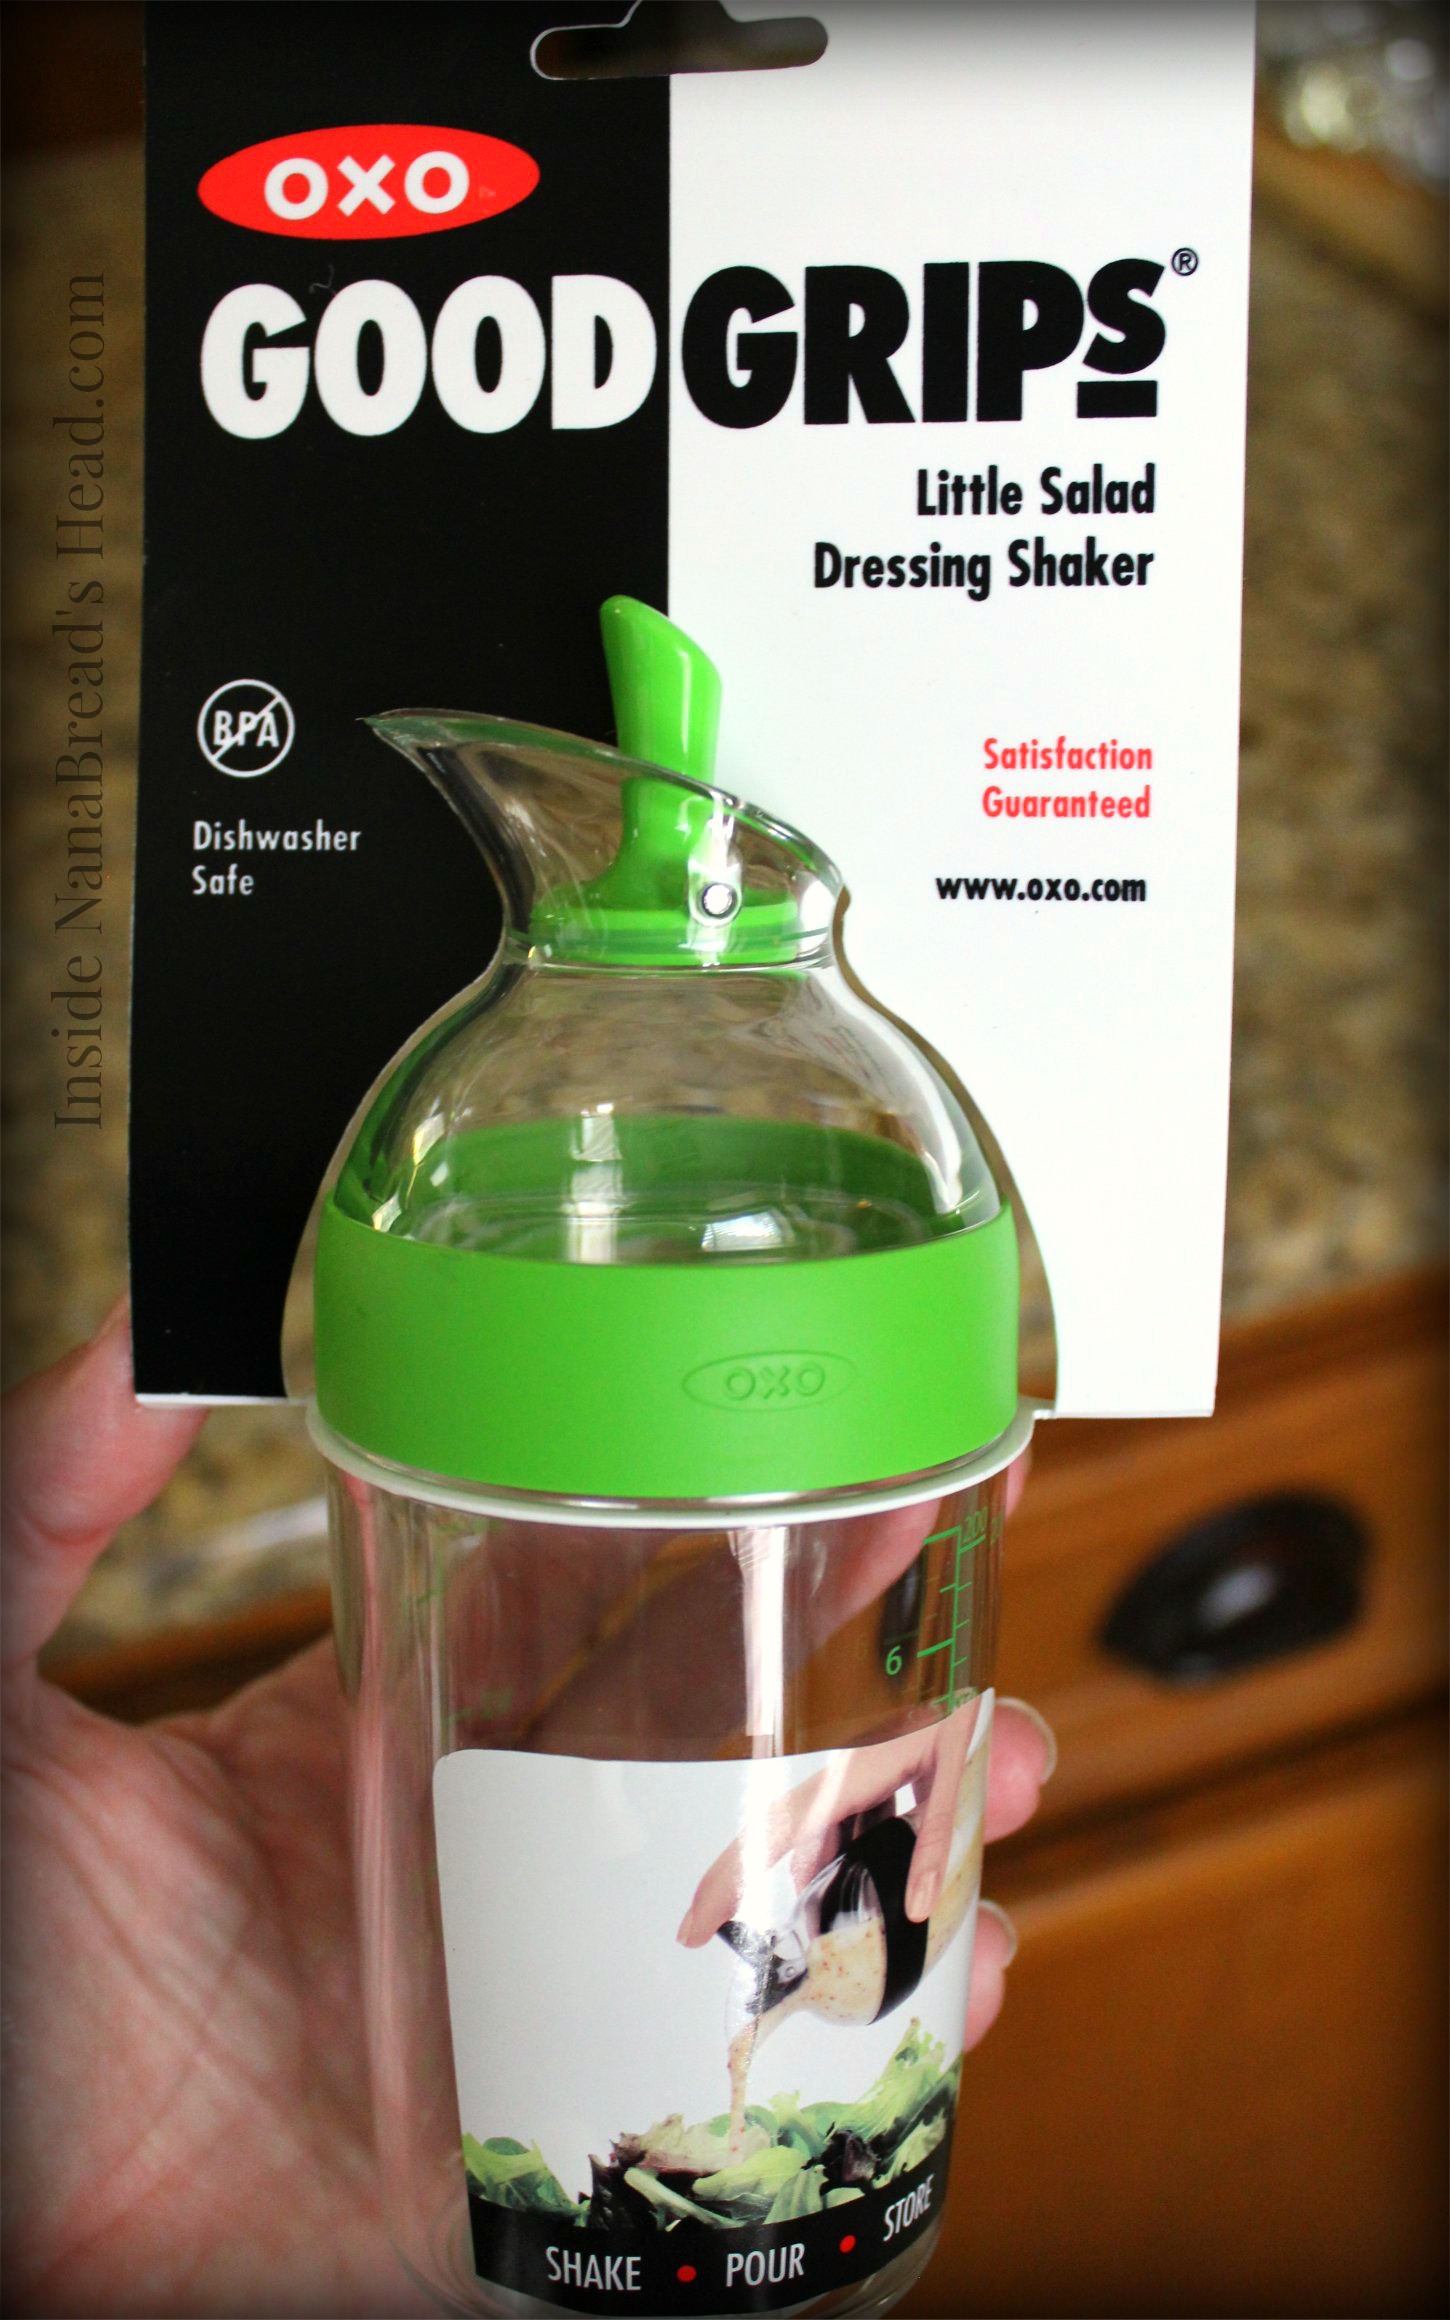 The OXO Good Grips Salad Dressing Shaker Makes Me Eat More Salad